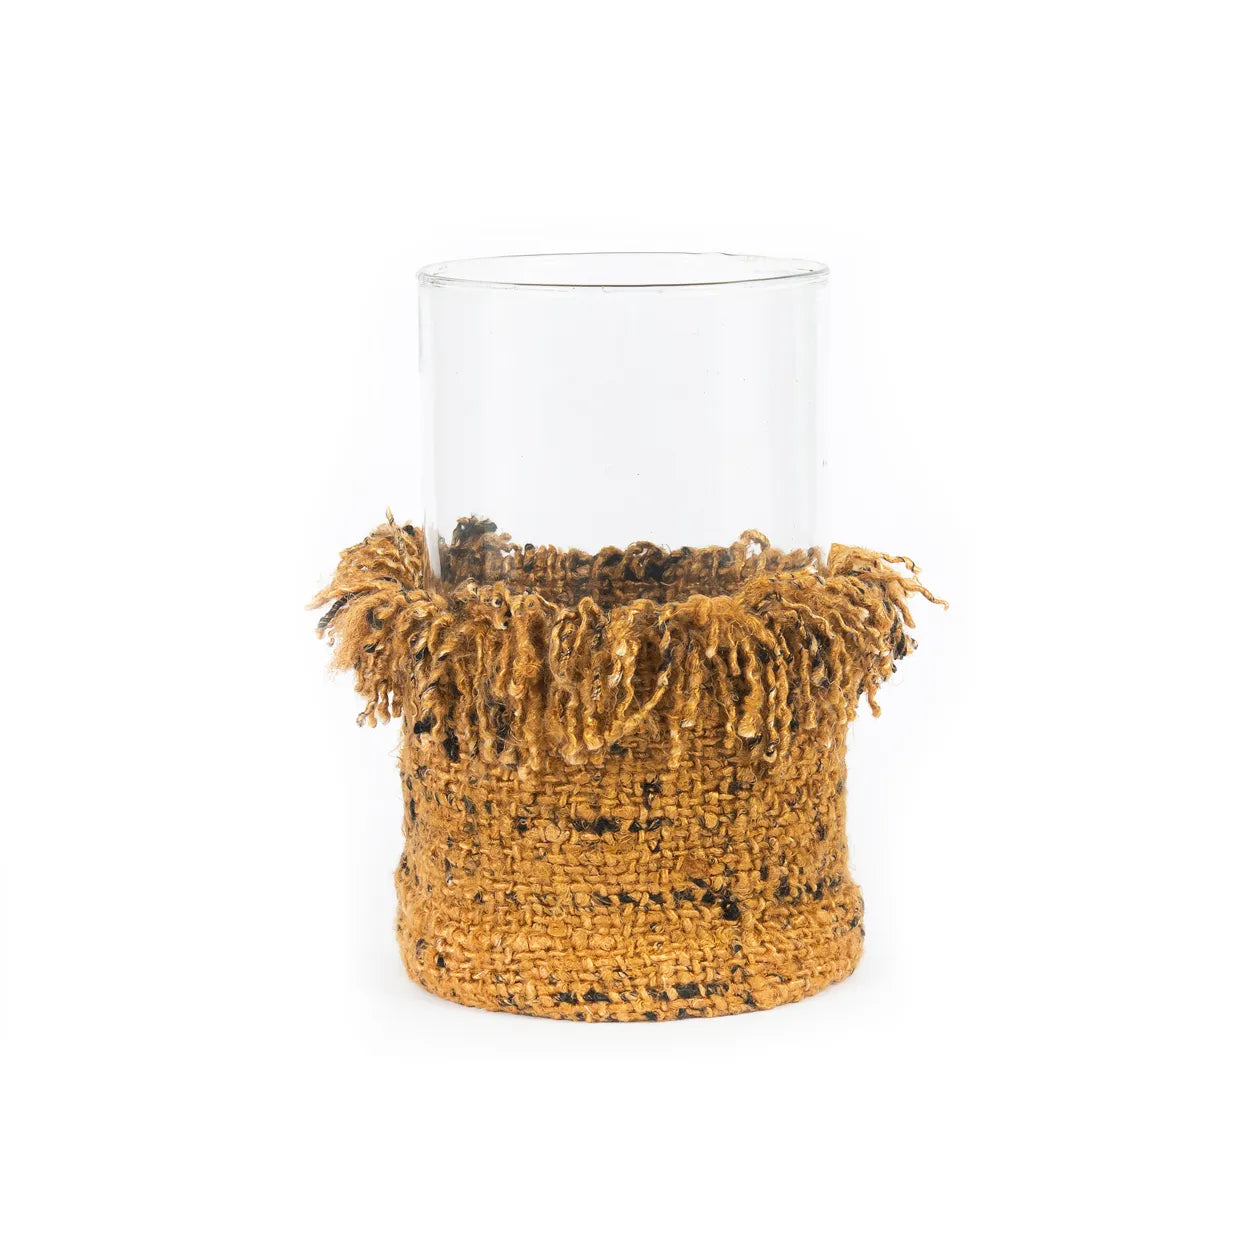 Cadaques Charm Holder - Glass Candle Accessory